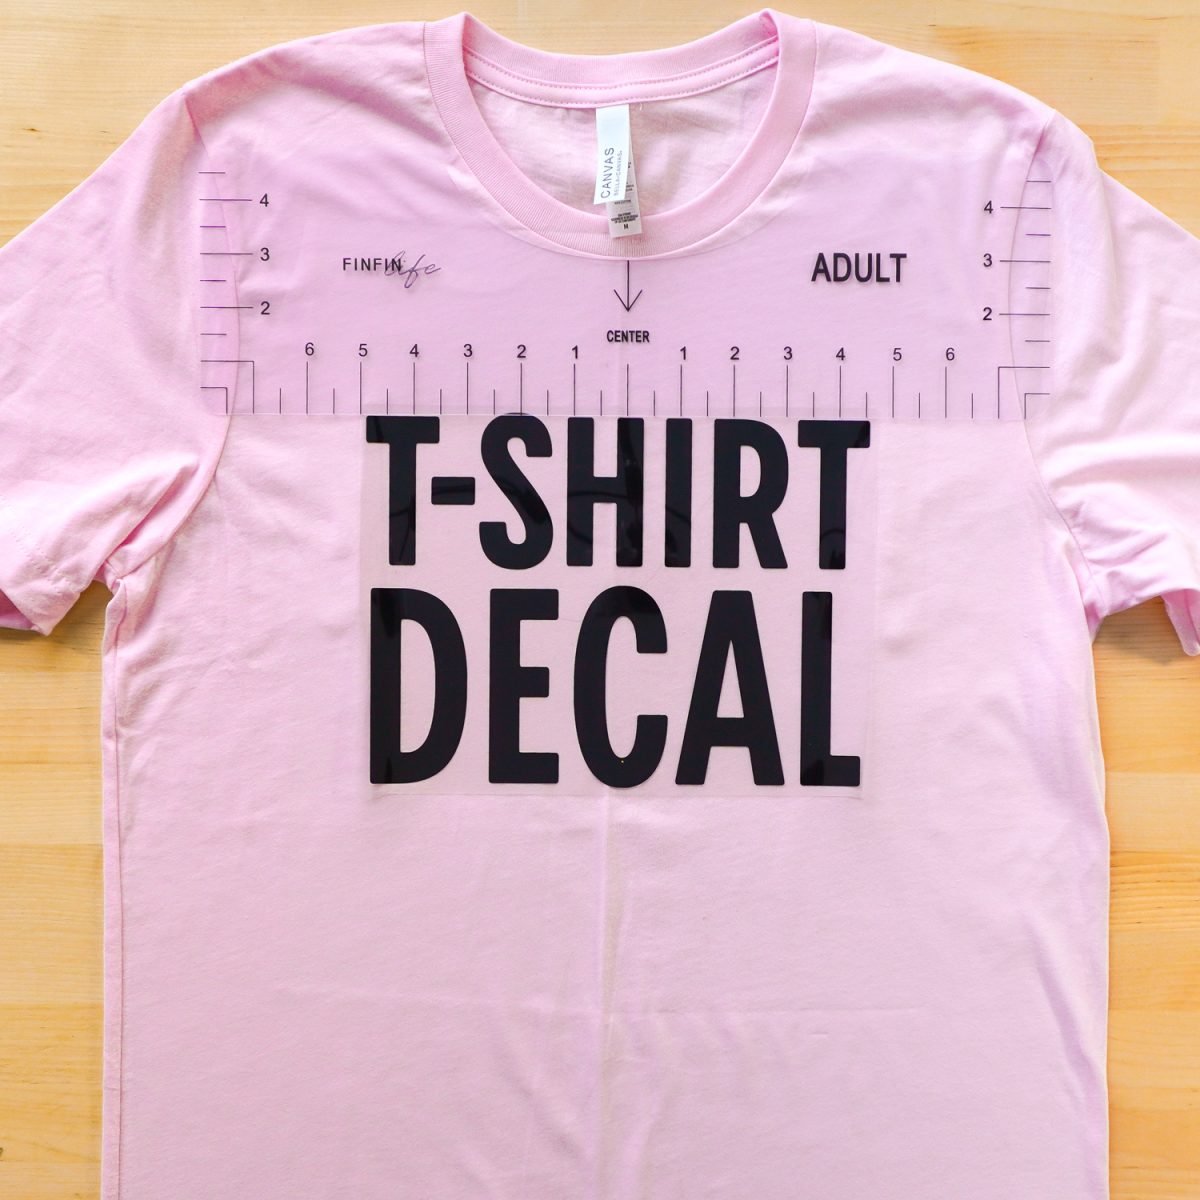 Pink t-shirt with decal and plastic ruler